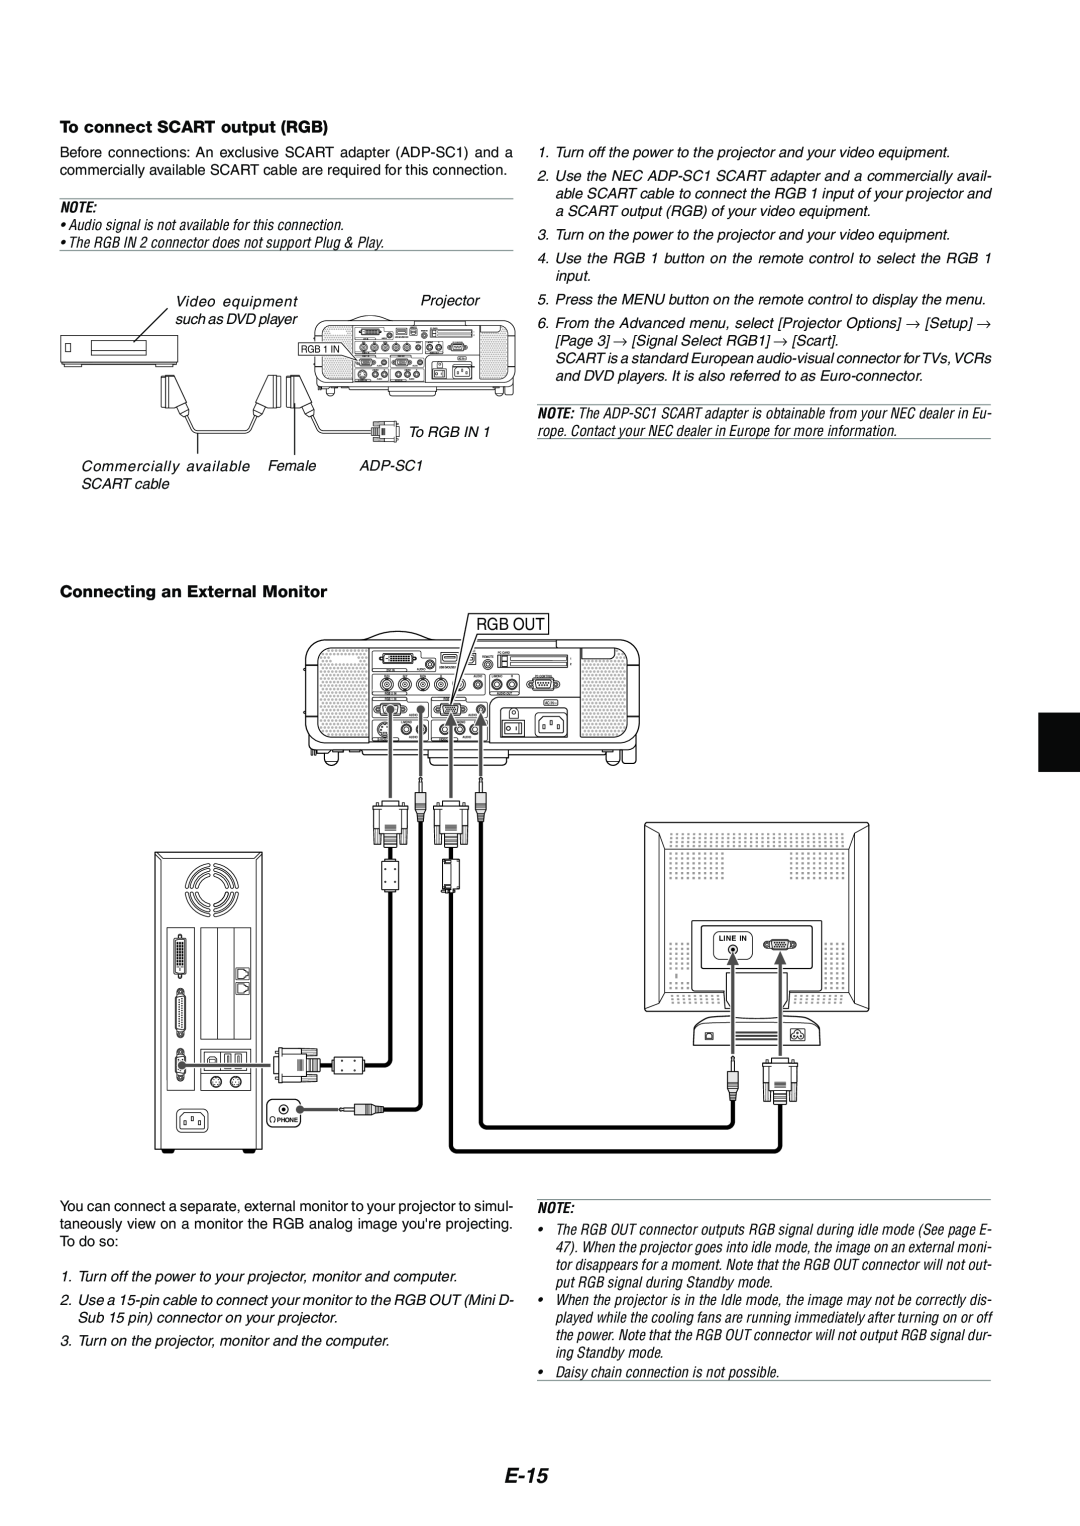 Kensington MT1065, MT1075 user manual E-15, To connect SCART output RGB, Connecting an External Monitor 